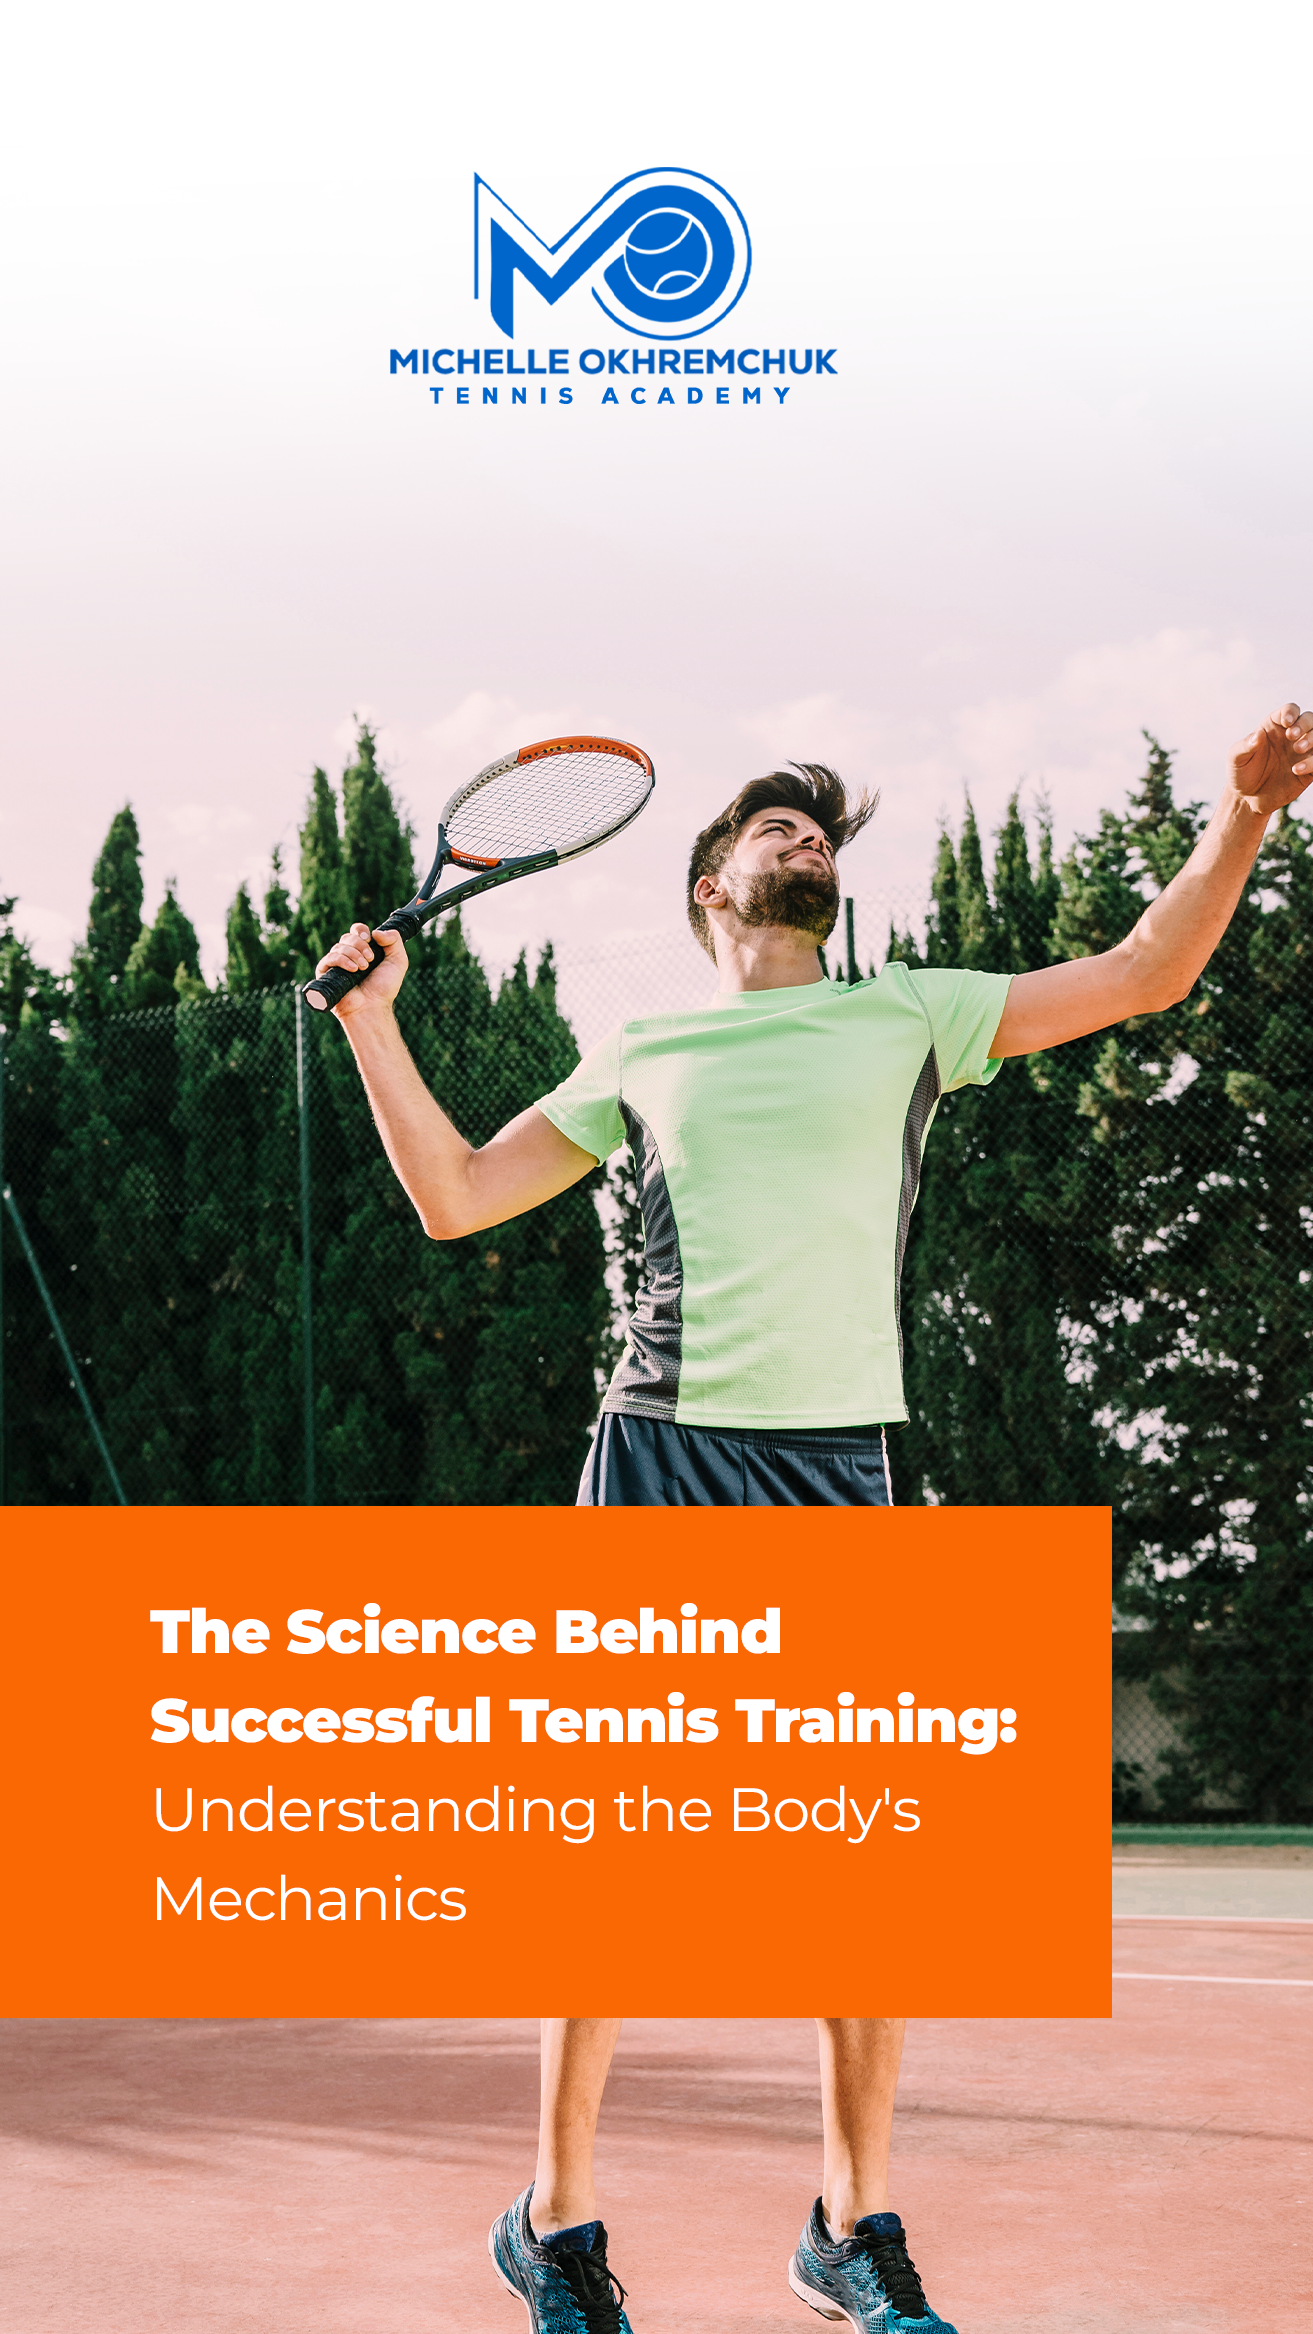 The Science Behind Successful Tennis Training Understanding the Body's Mechanics - Mo Tennis Training Academy